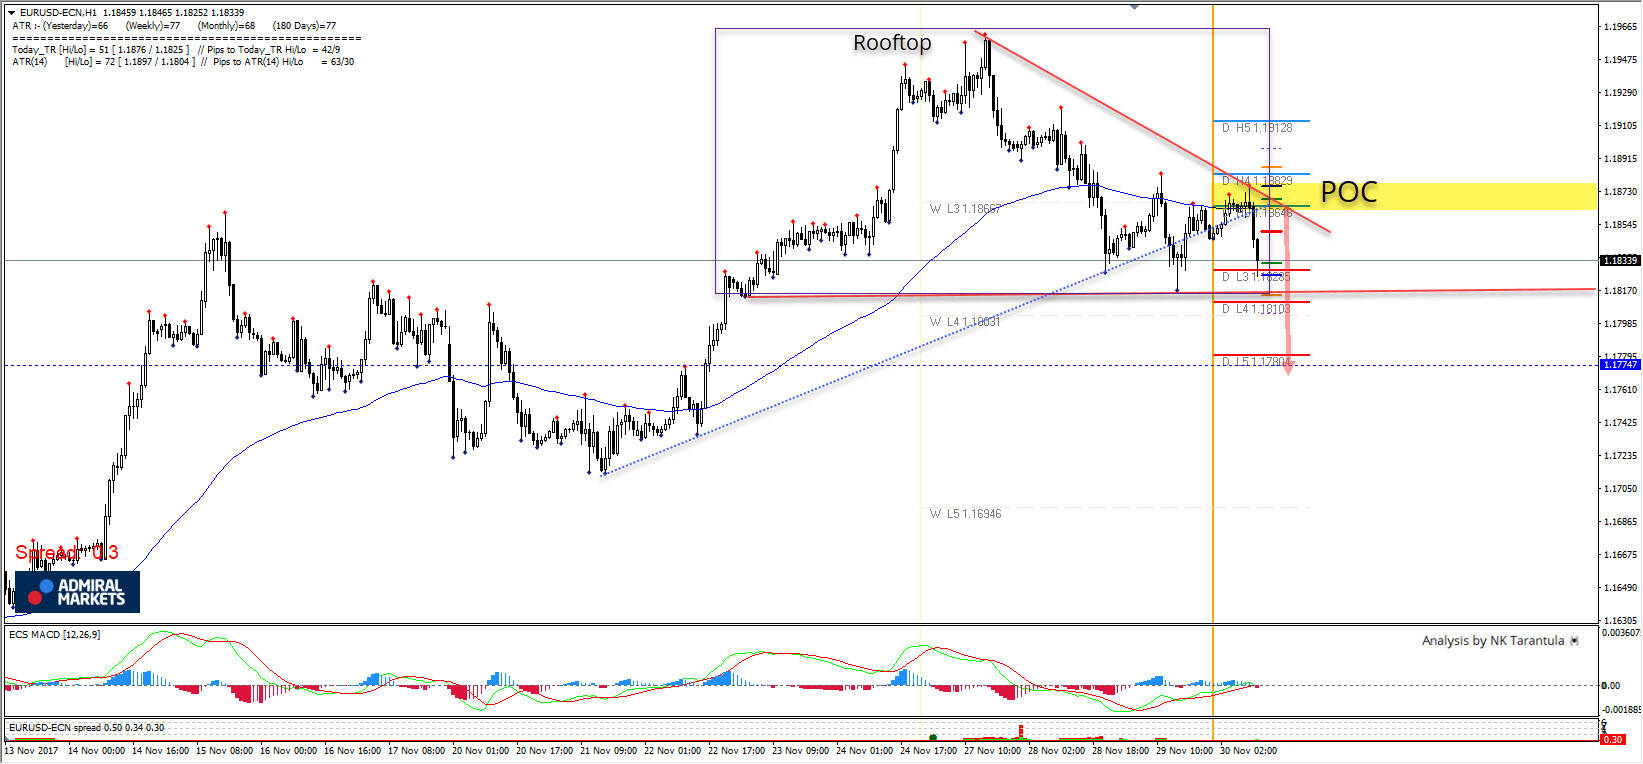 EUR/USD Continuation of the Rooftop Pattern Below 1.1800